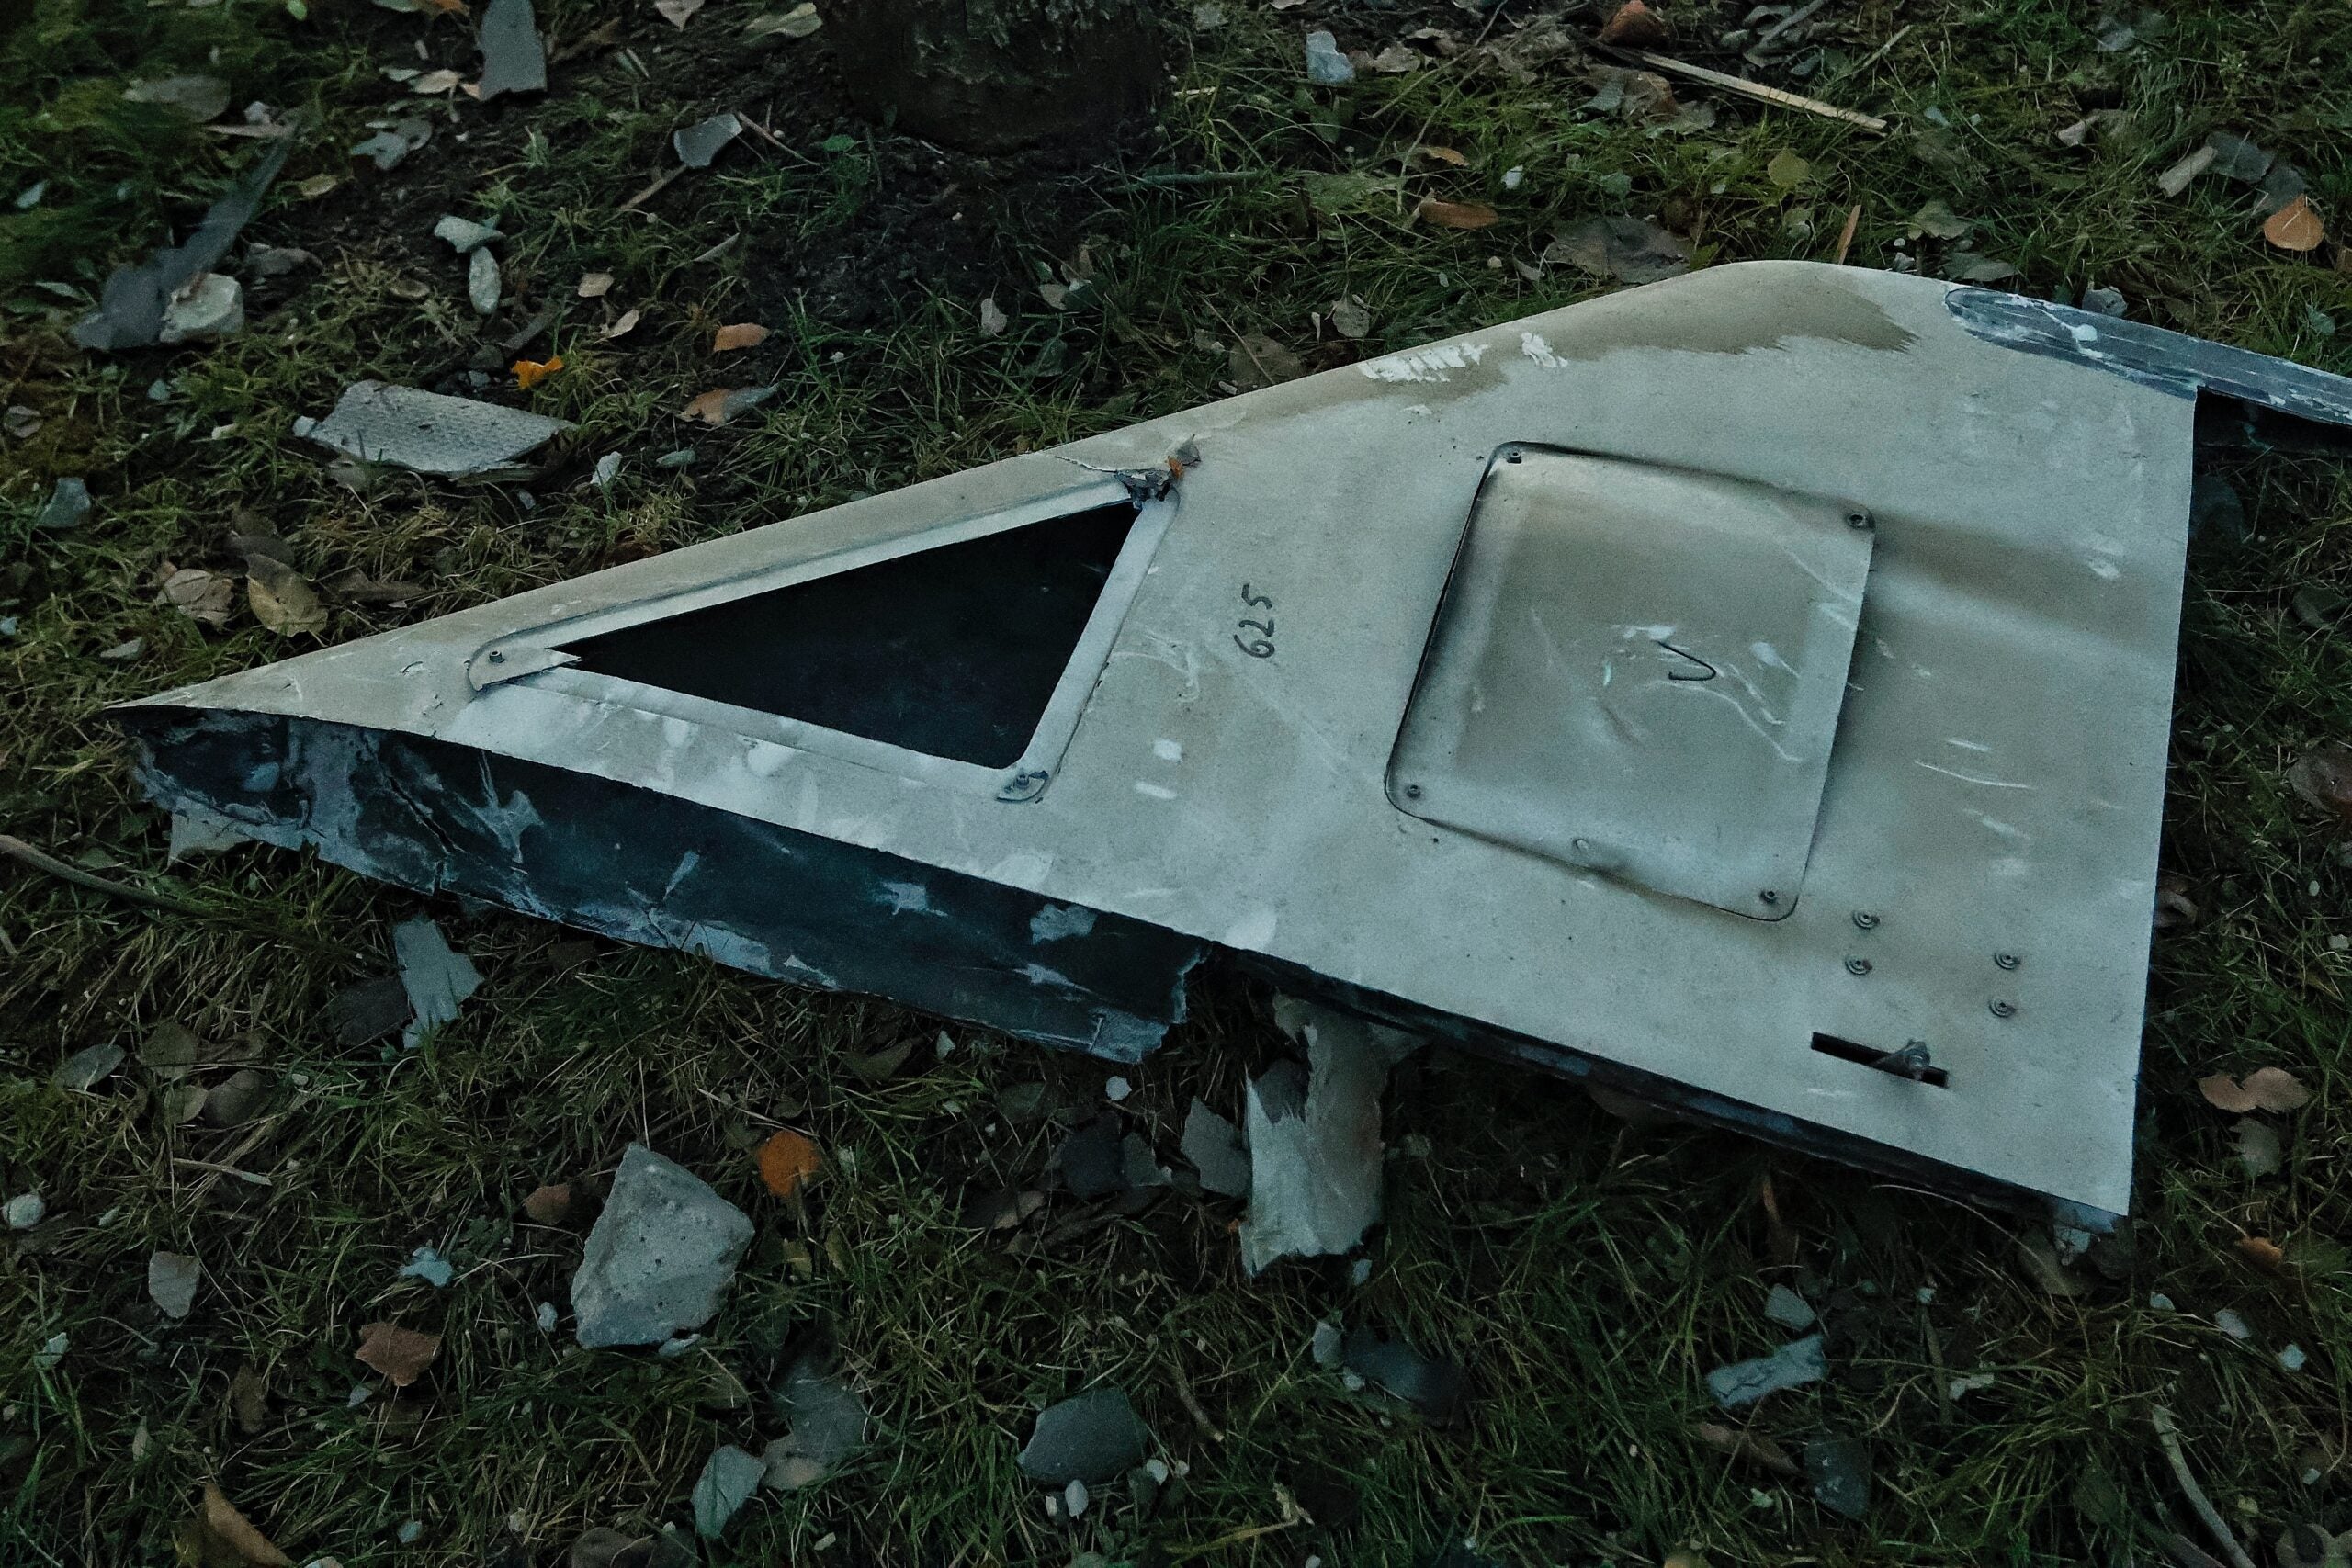 KYIV, UKRAINE - NOVEMBER 25: A drone fragment lies in the yard of a residential building in Solomianskyi district on November 25, 2023 in Kyiv, Ukraine. Russian forces launched several drone attacks across Kyiv during the early hours of Nov. 25, injuring civilians and damaging the city's infrastructure in a few districts. At least six dozen air targets were intercepted by Ukrainian Air Defense Forces. (Photo by Yan Dobronosov/Global Images Ukraine via Getty Images)